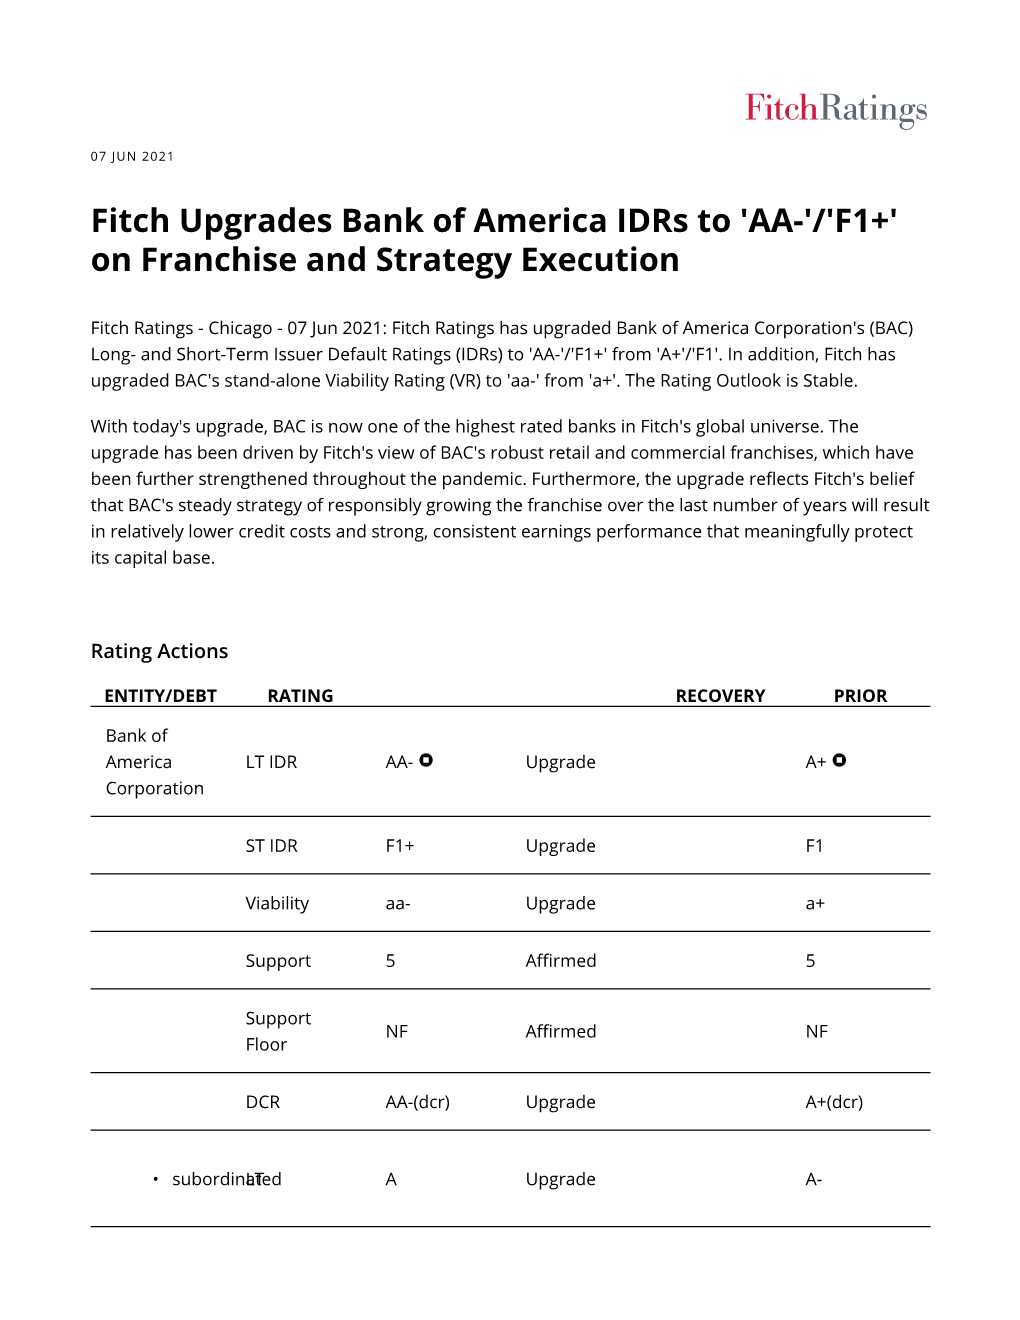 Fitch Upgrades Bank of America Idrs to 'AA-'/'F1+' on Franchise and Strategy Execution